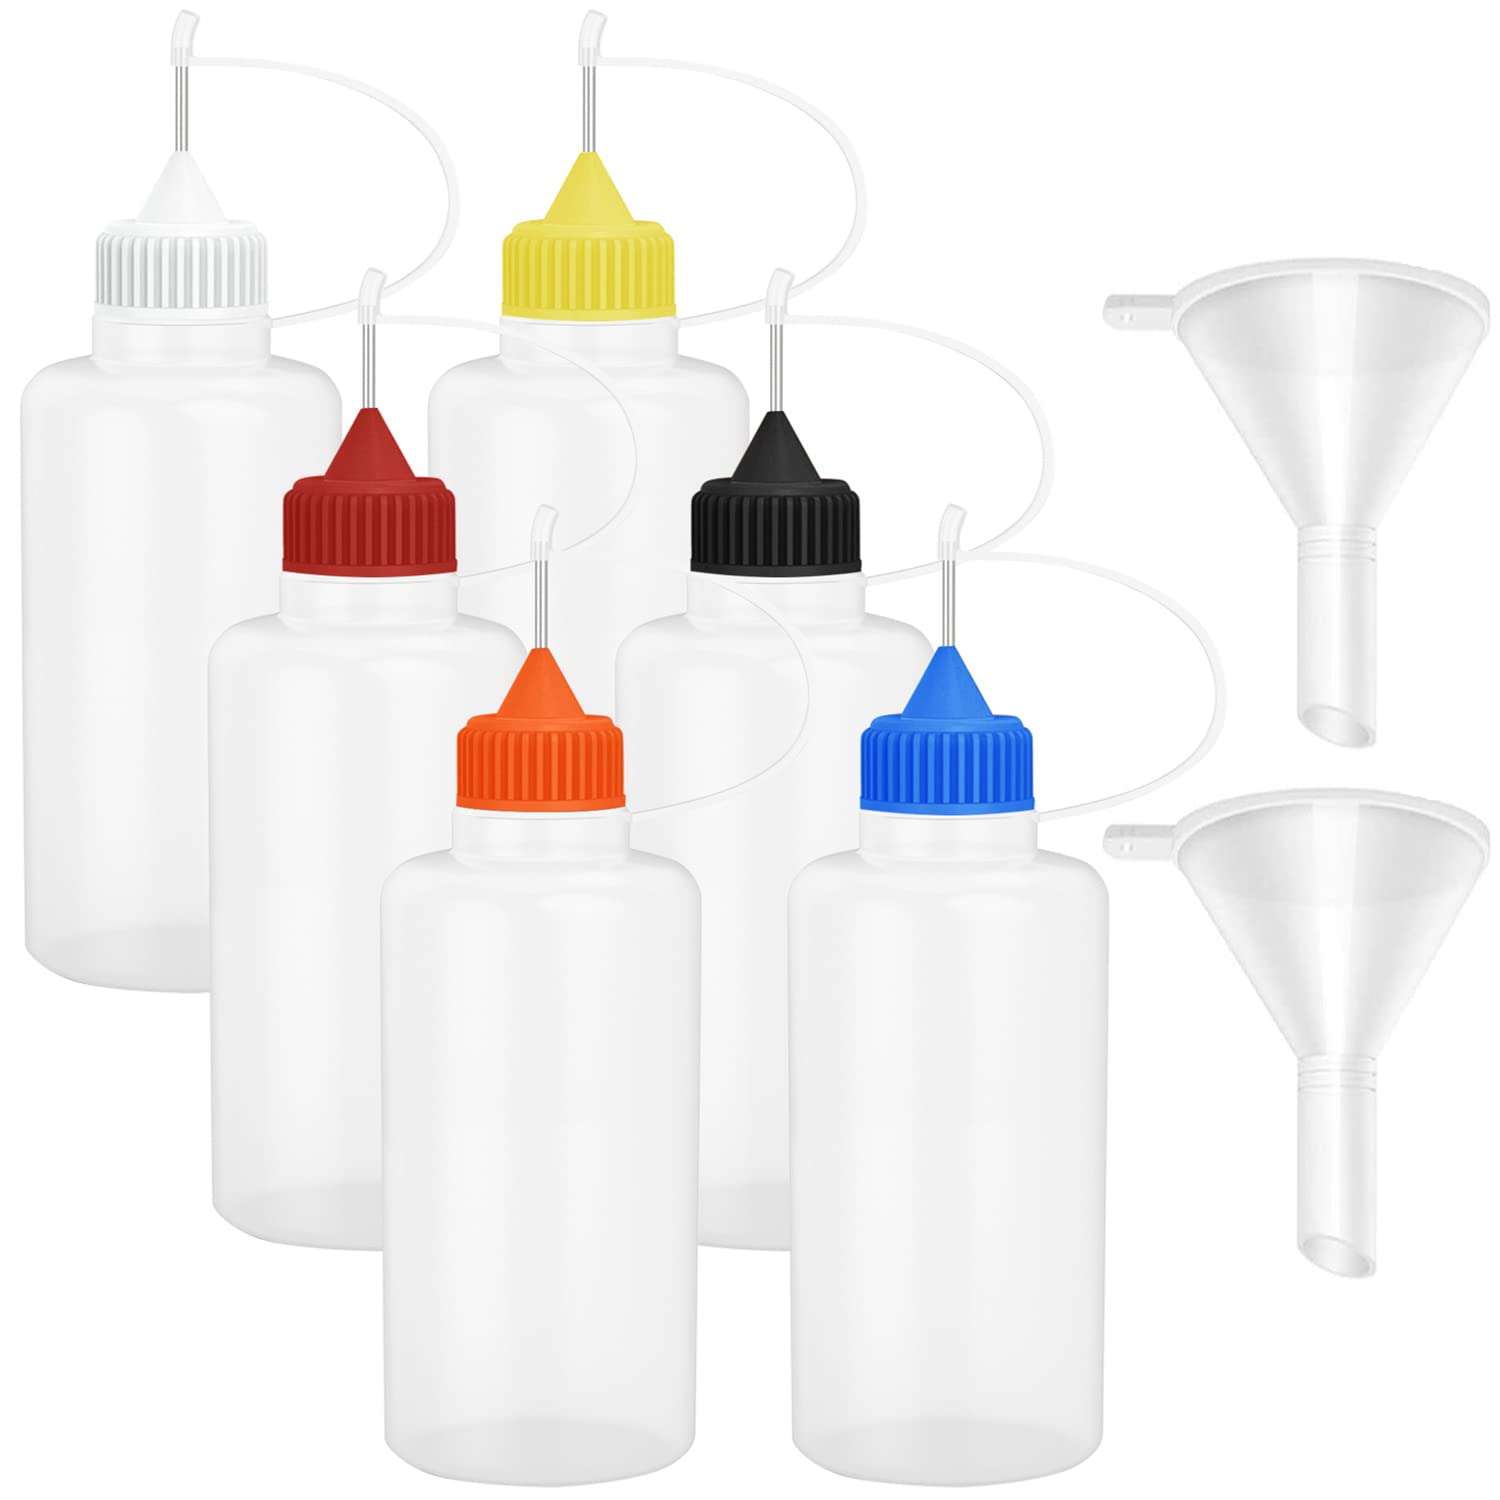 Plastic Dropper Bottle with Needle Tip for Glue, Liquid, Paint, Oil / –  Farmhouse Fabrication